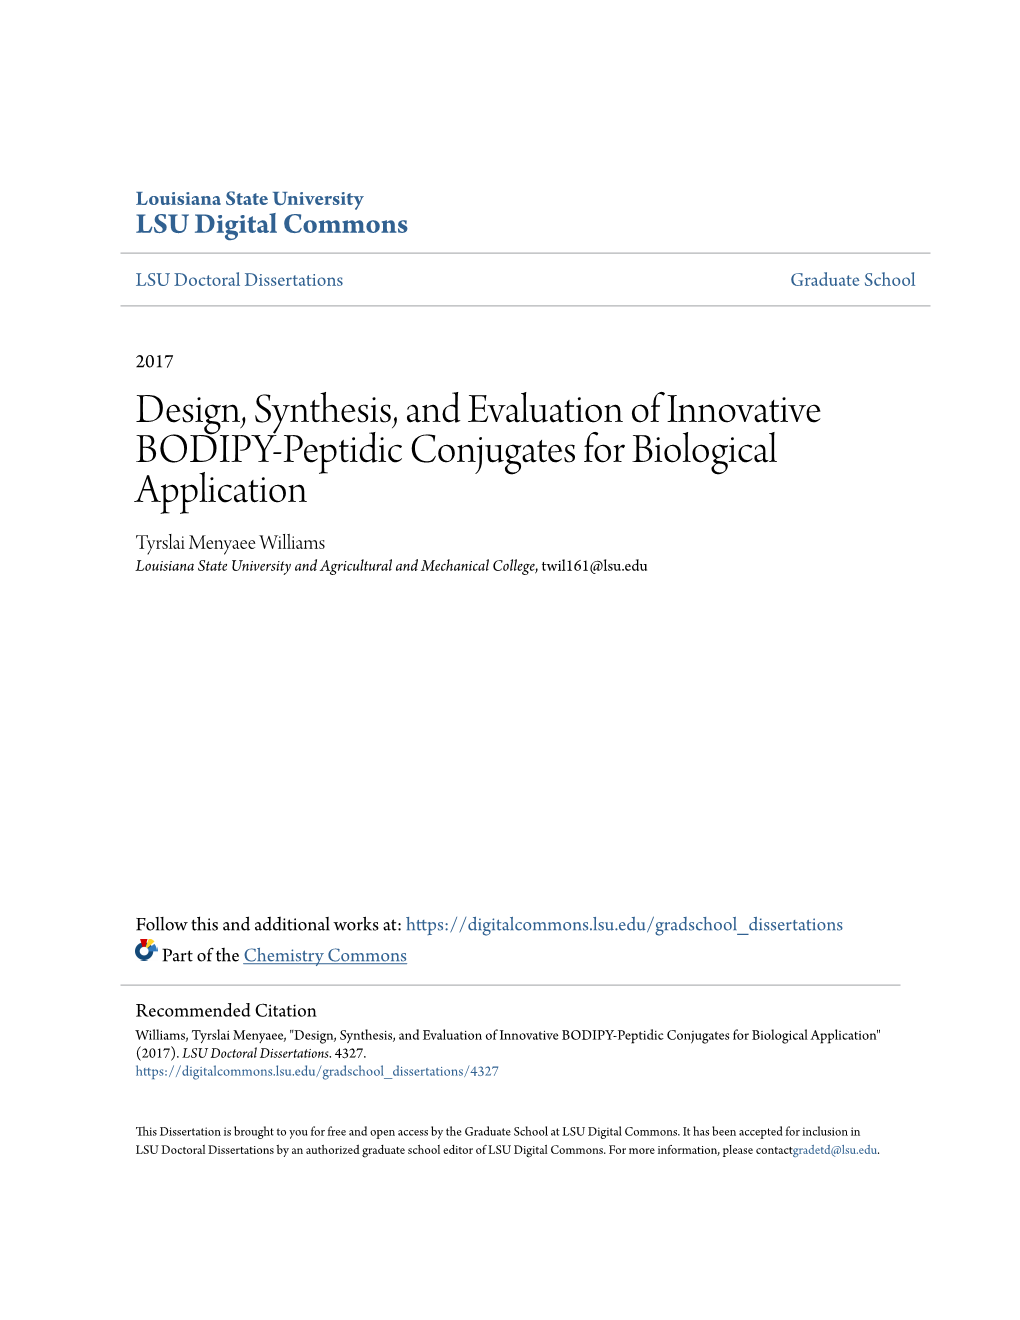 Design, Synthesis, and Evaluation of Innovative BODIPY-Peptidic Conjugates for Biological Application